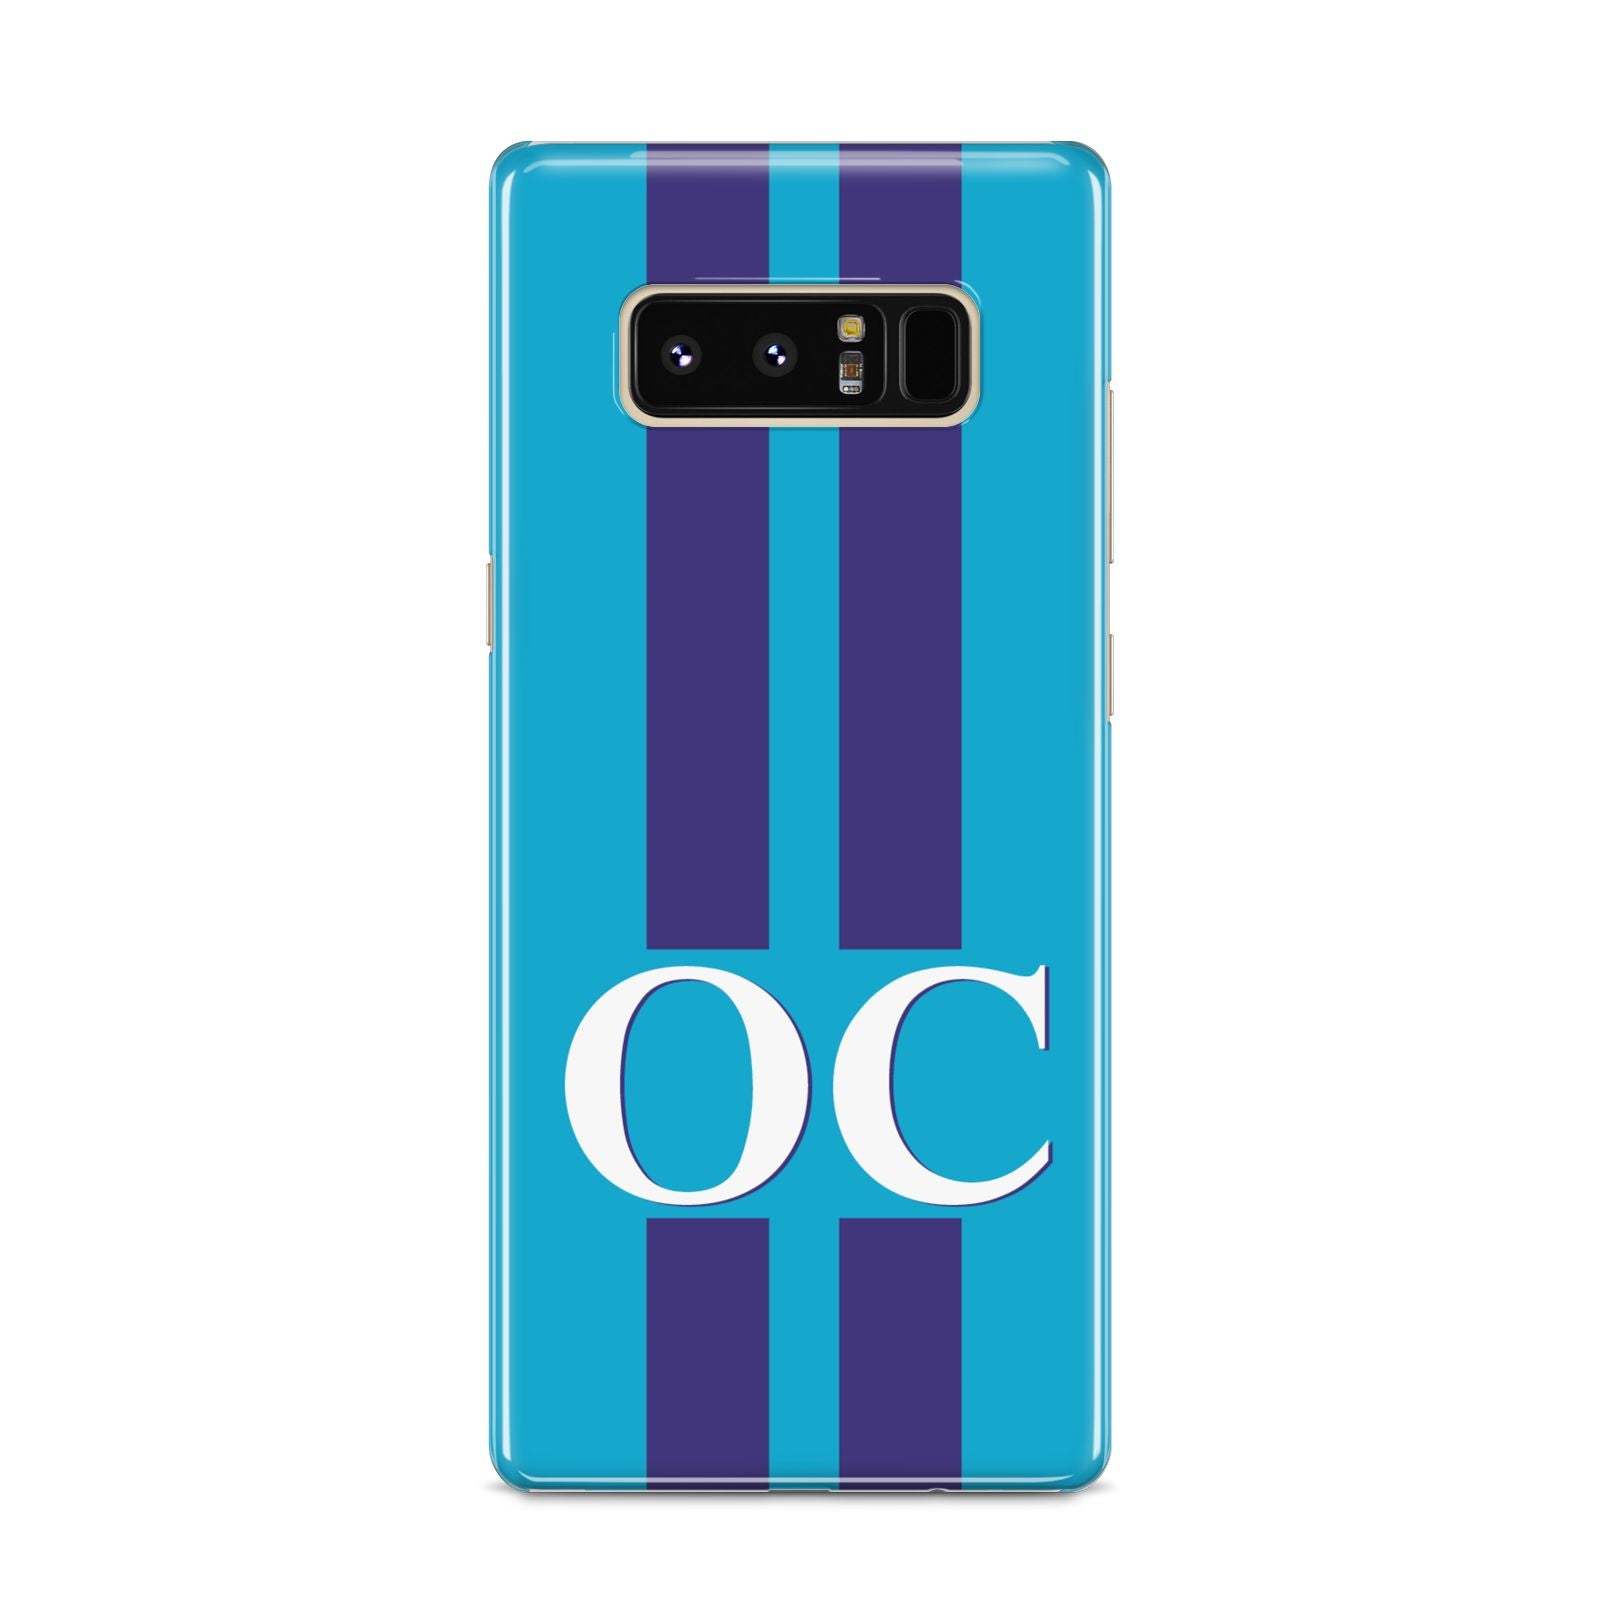 Turquoise Personalised Samsung Galaxy S8 Case